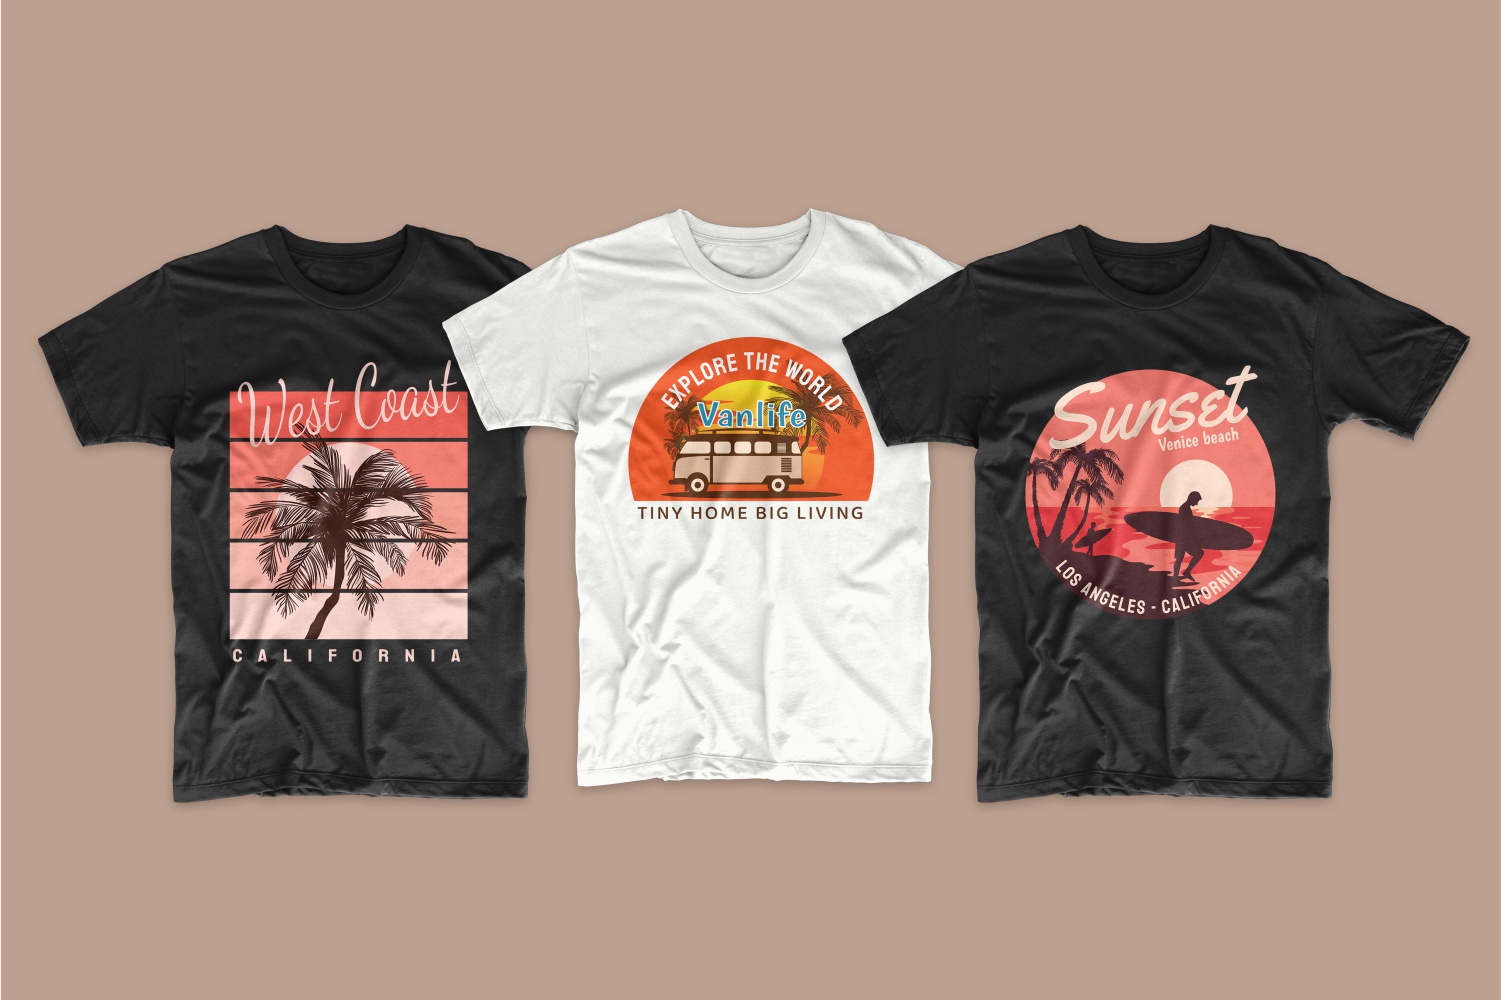 T-shirts featuring palm trees and surfers.